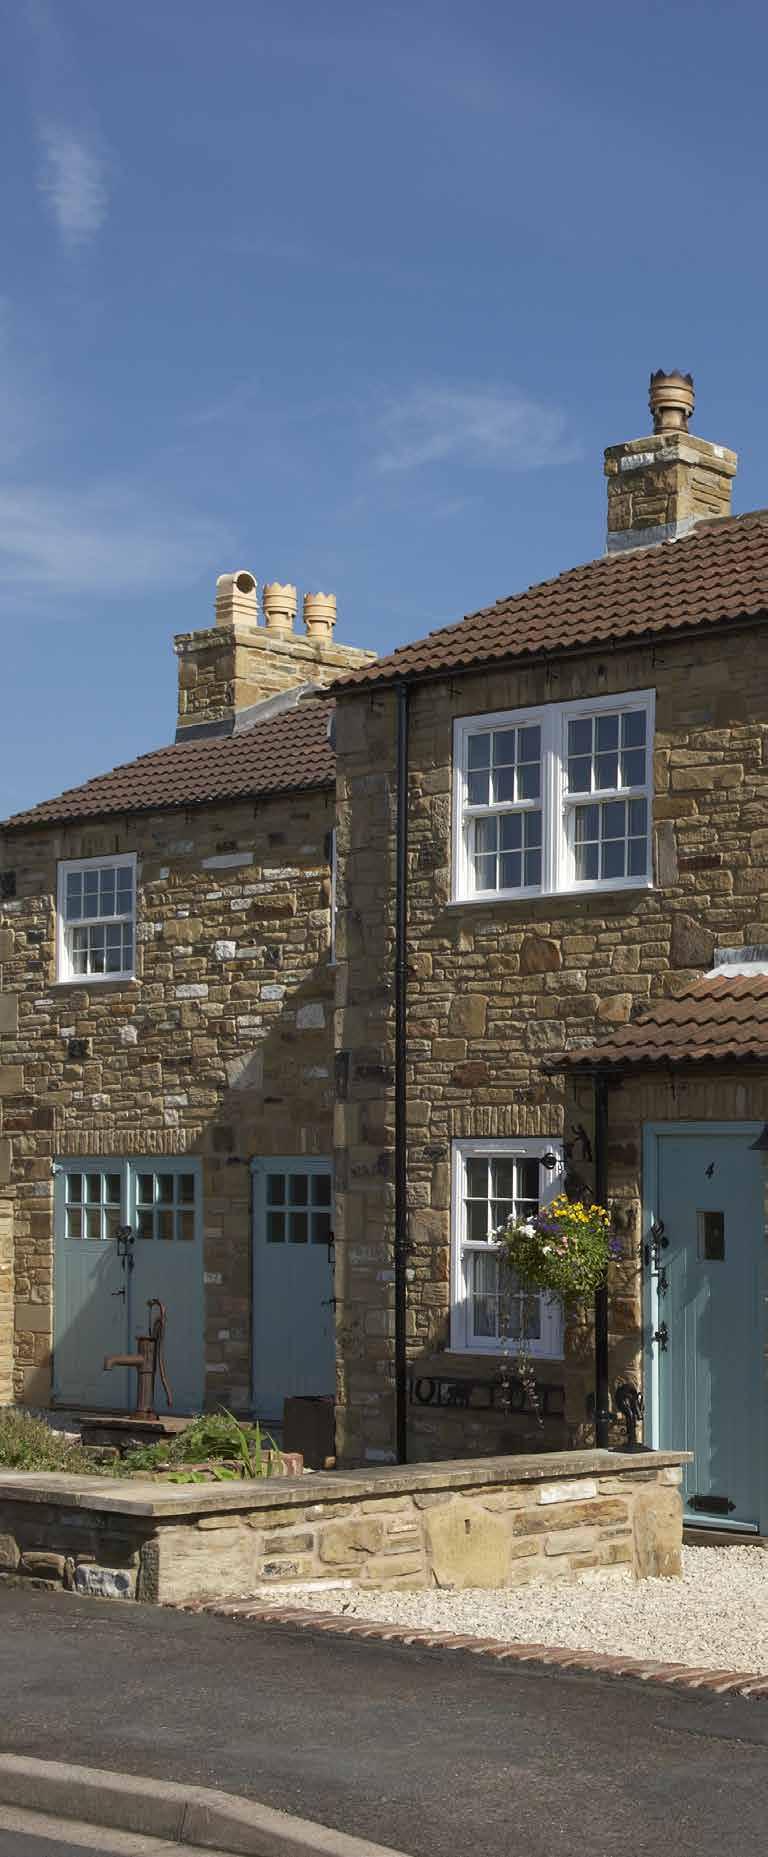 Welcome Thank you for considering our company for your Sliding Sash Windows. Our brochure gives you some examples of the amazing windows we produce and the detail that goes into every one.